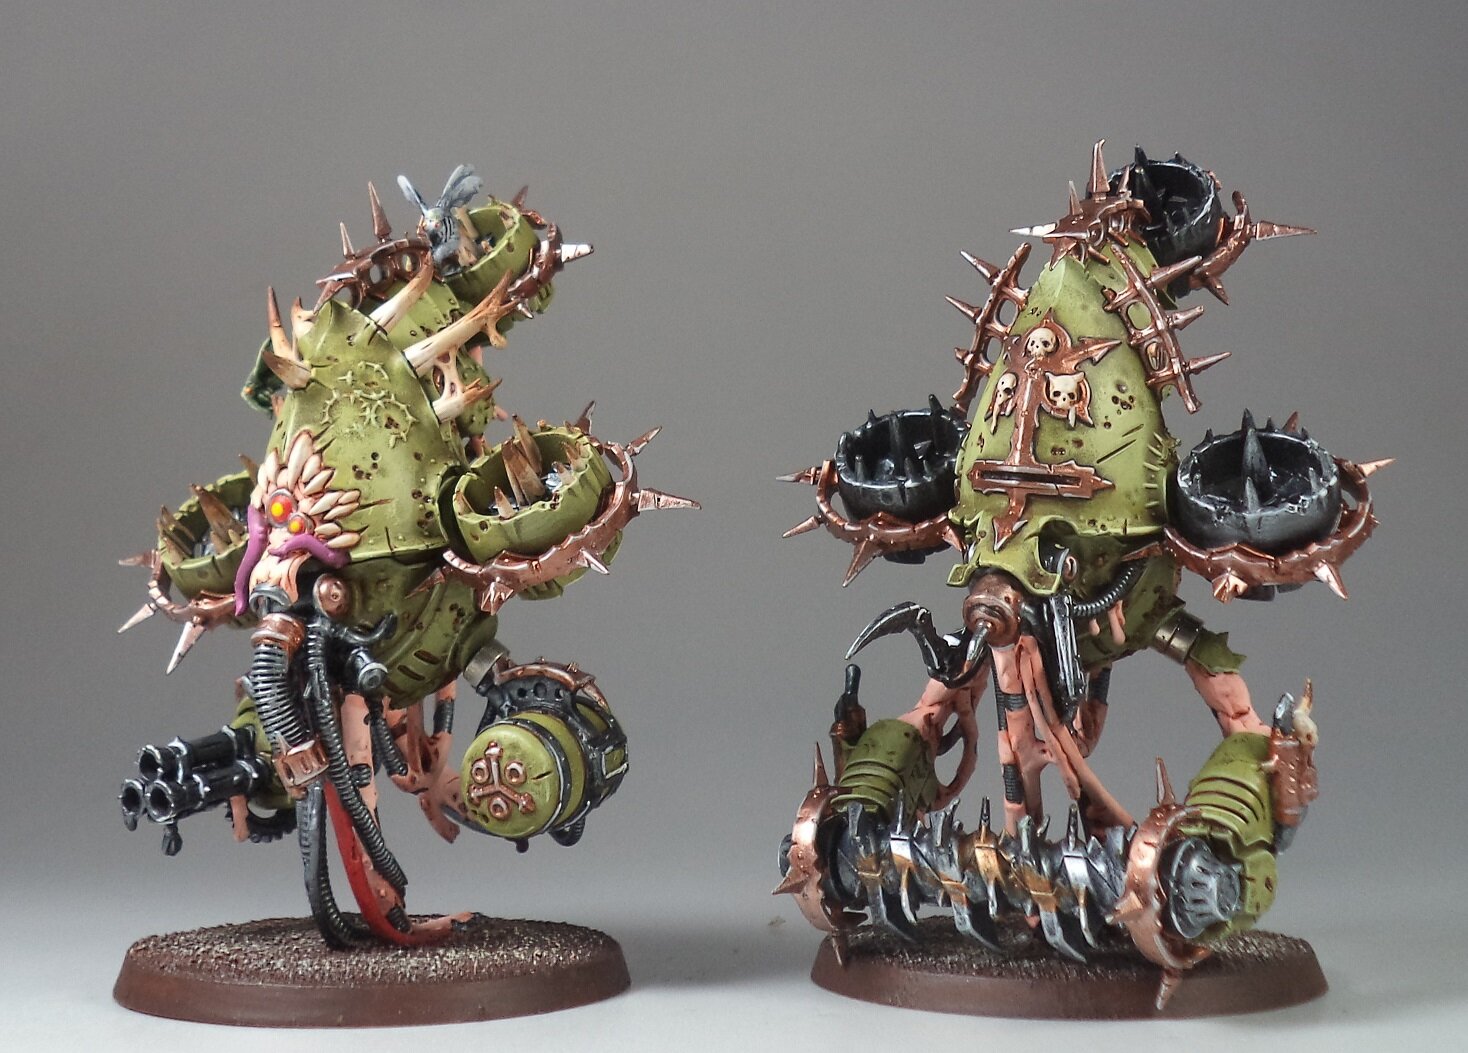 40k miniature painting service gaming painting painting commissions deathguard nurgle (8).JPG